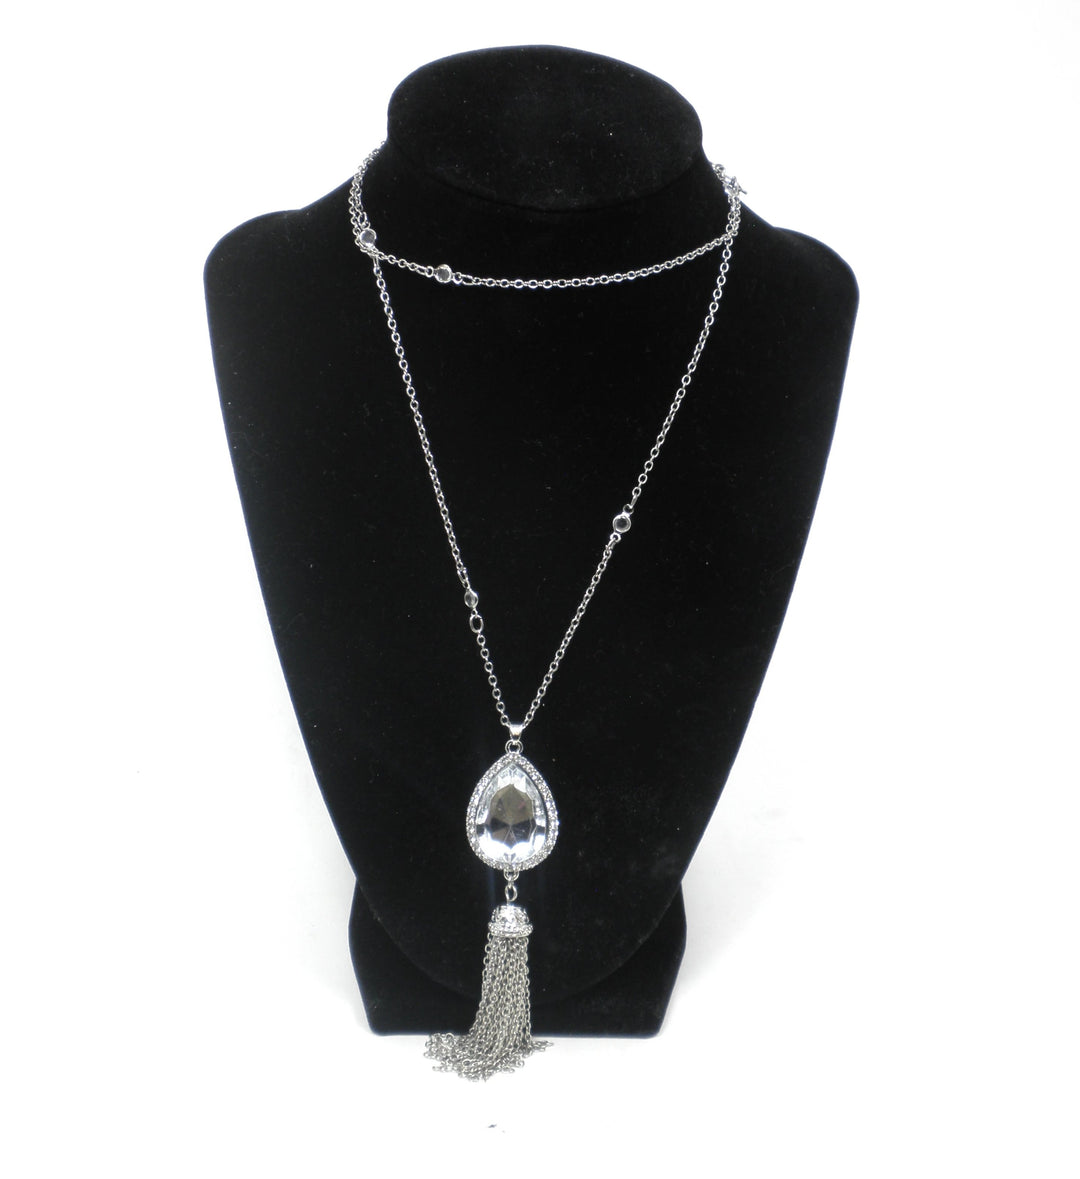 Silver Necklace With Raindrop Gem & Tassel - The Fashion Foundation